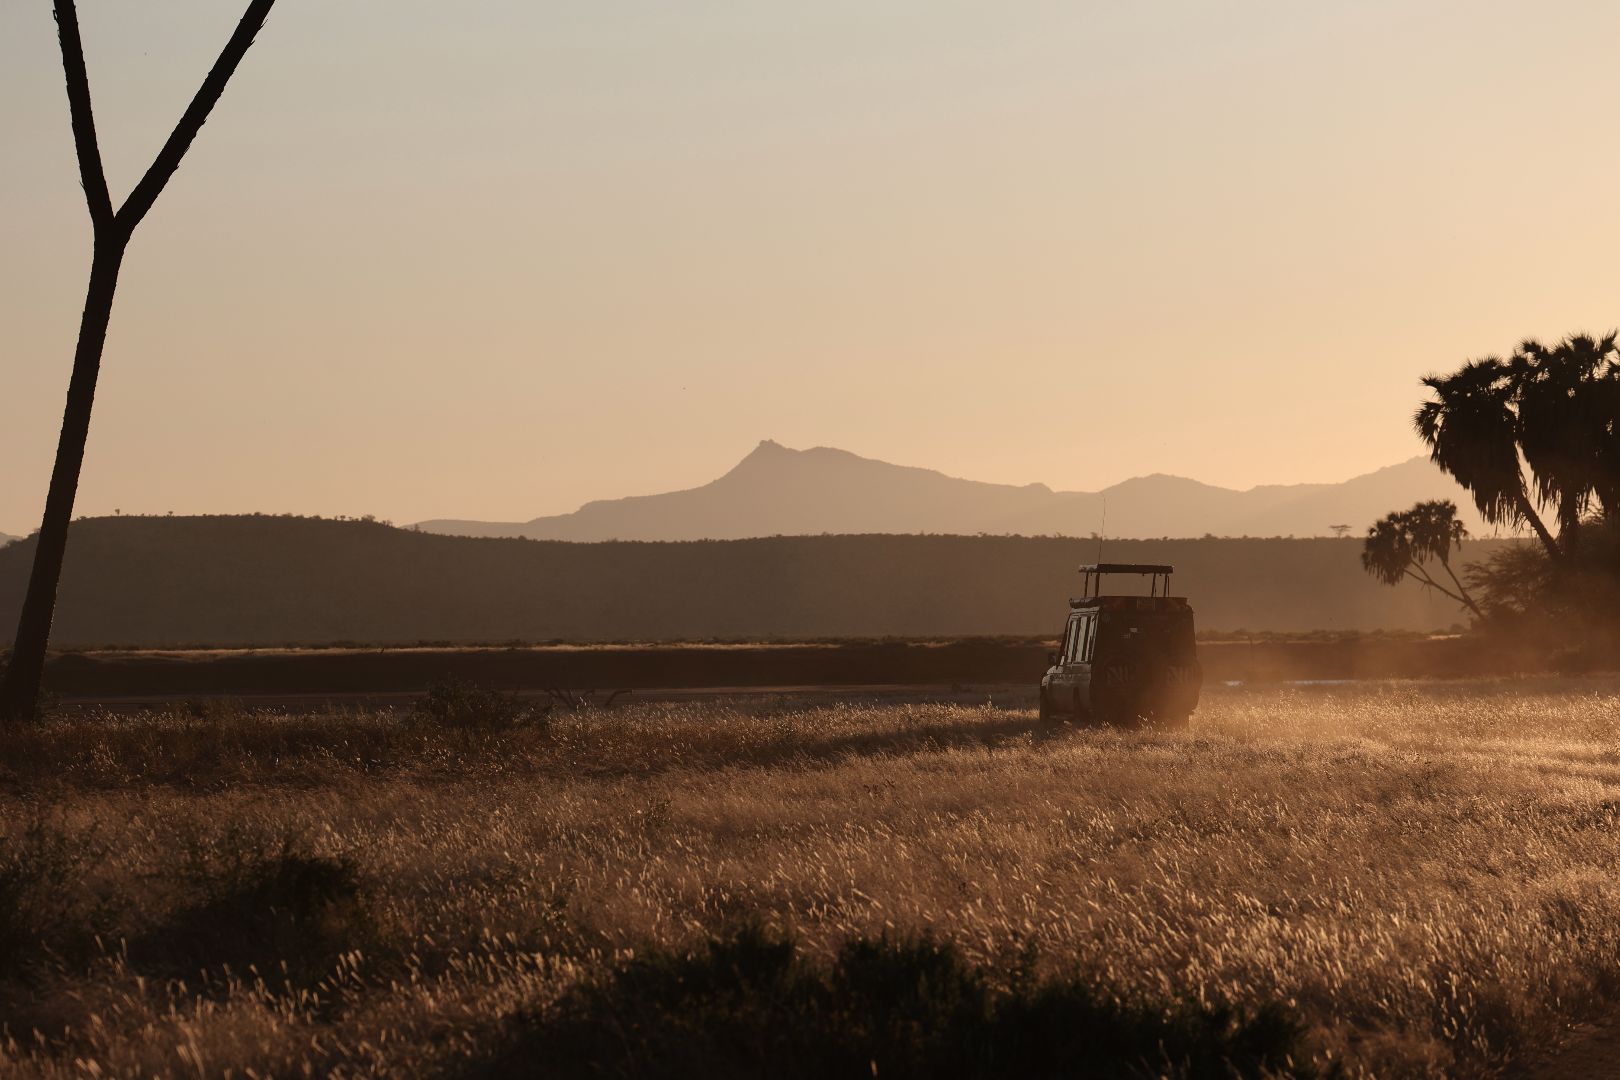 Jeep at sunset or sunrise in field in Kenya